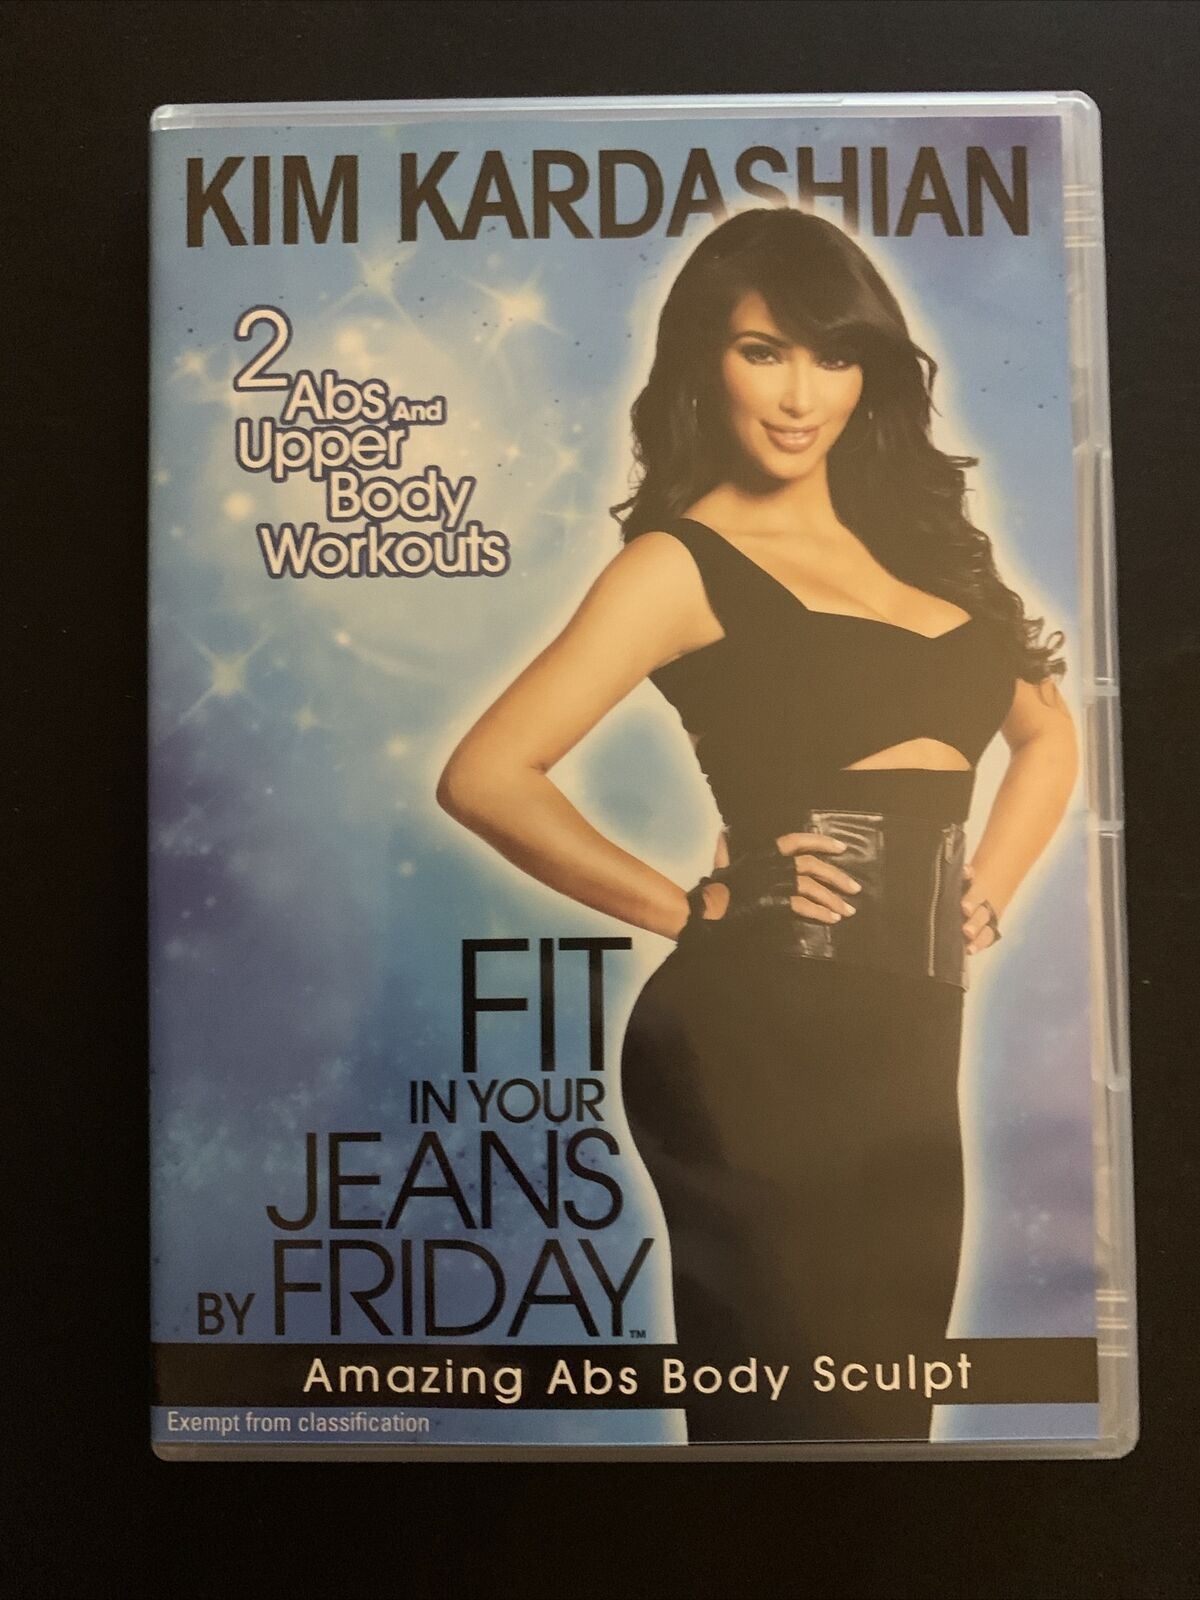 Kim Kardashian - Fit In Your Jeans By Friday - Amazing Abs Body Sculpt (DVD)